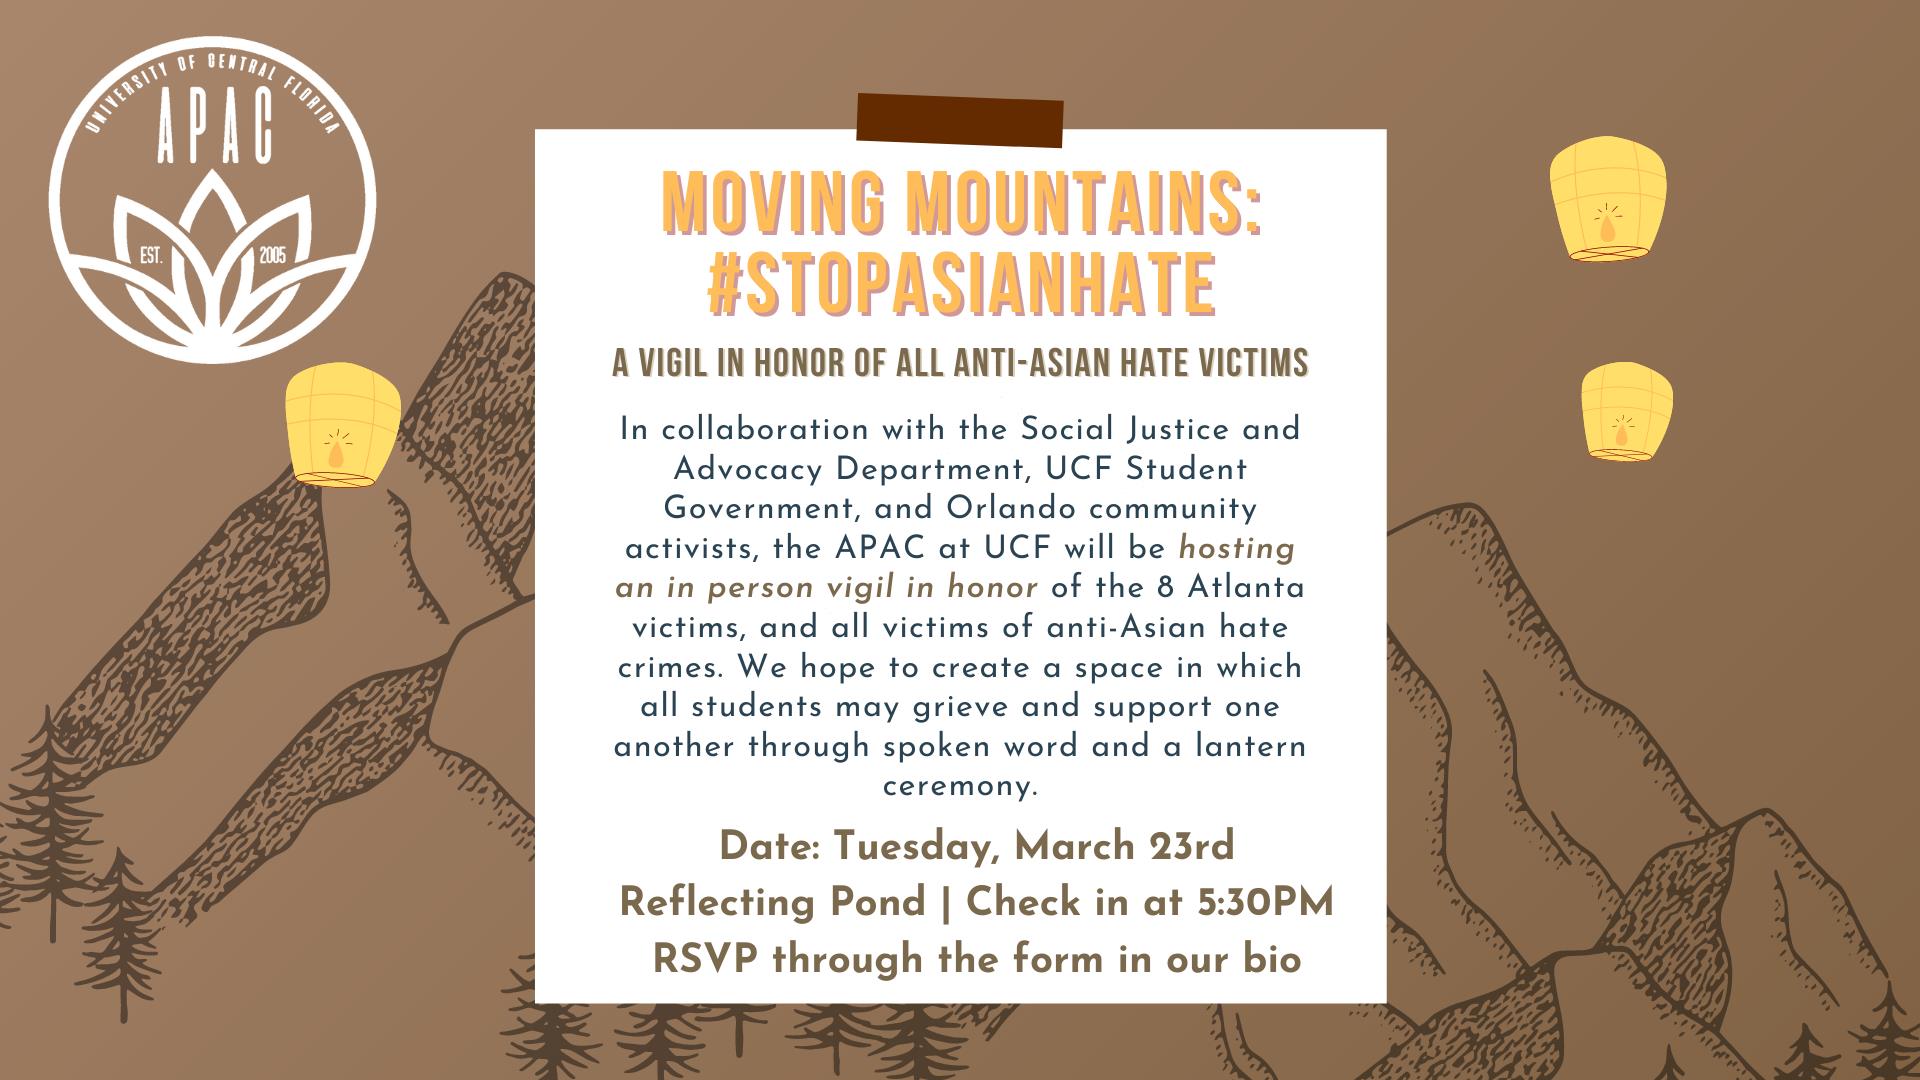 Moving Mountains: A Vigil For Victims of Anti-Asian Hate Crimes